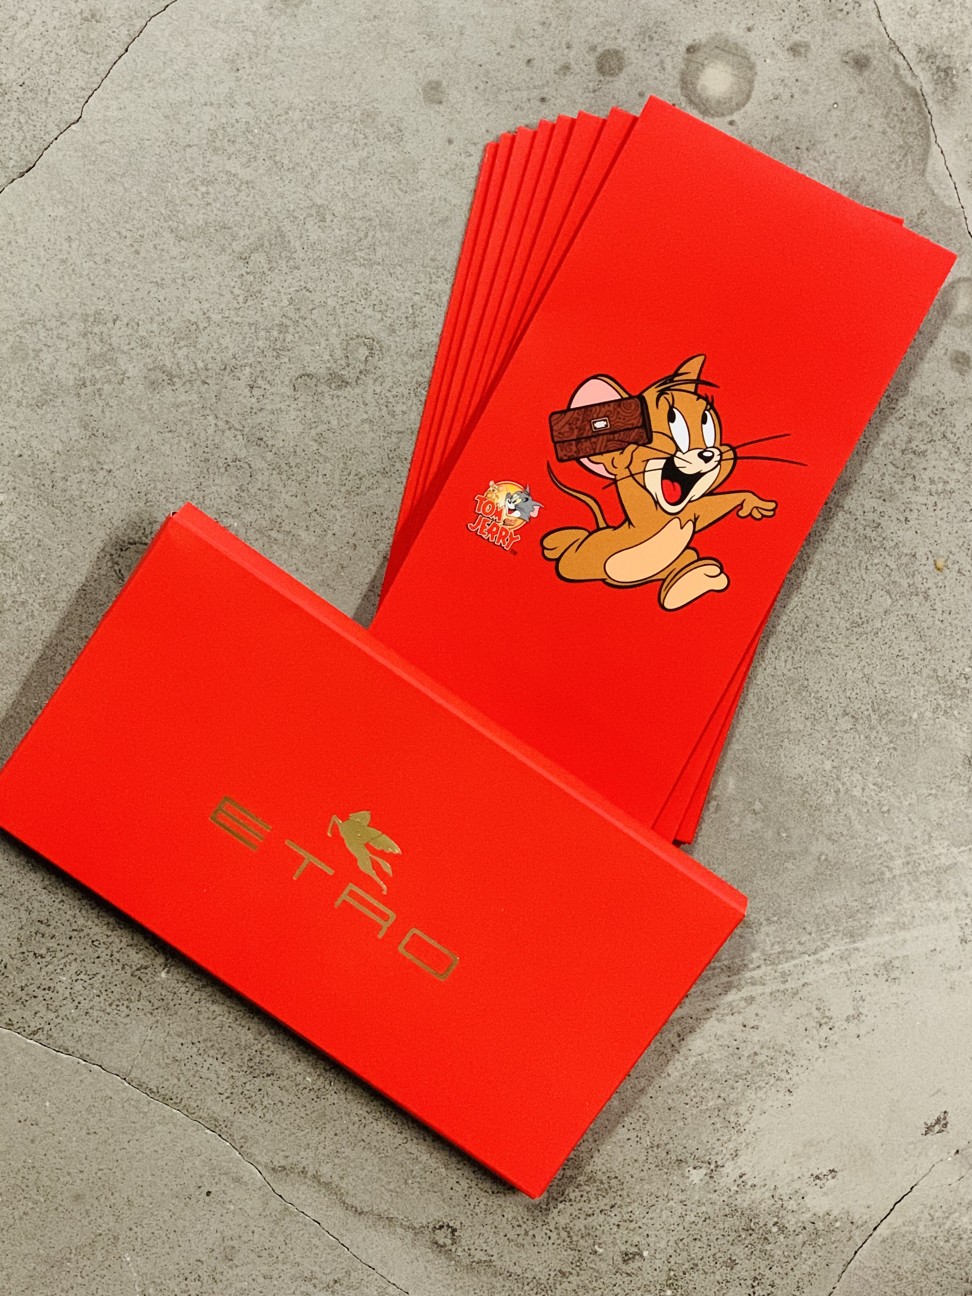 Etro's red packets for 2020